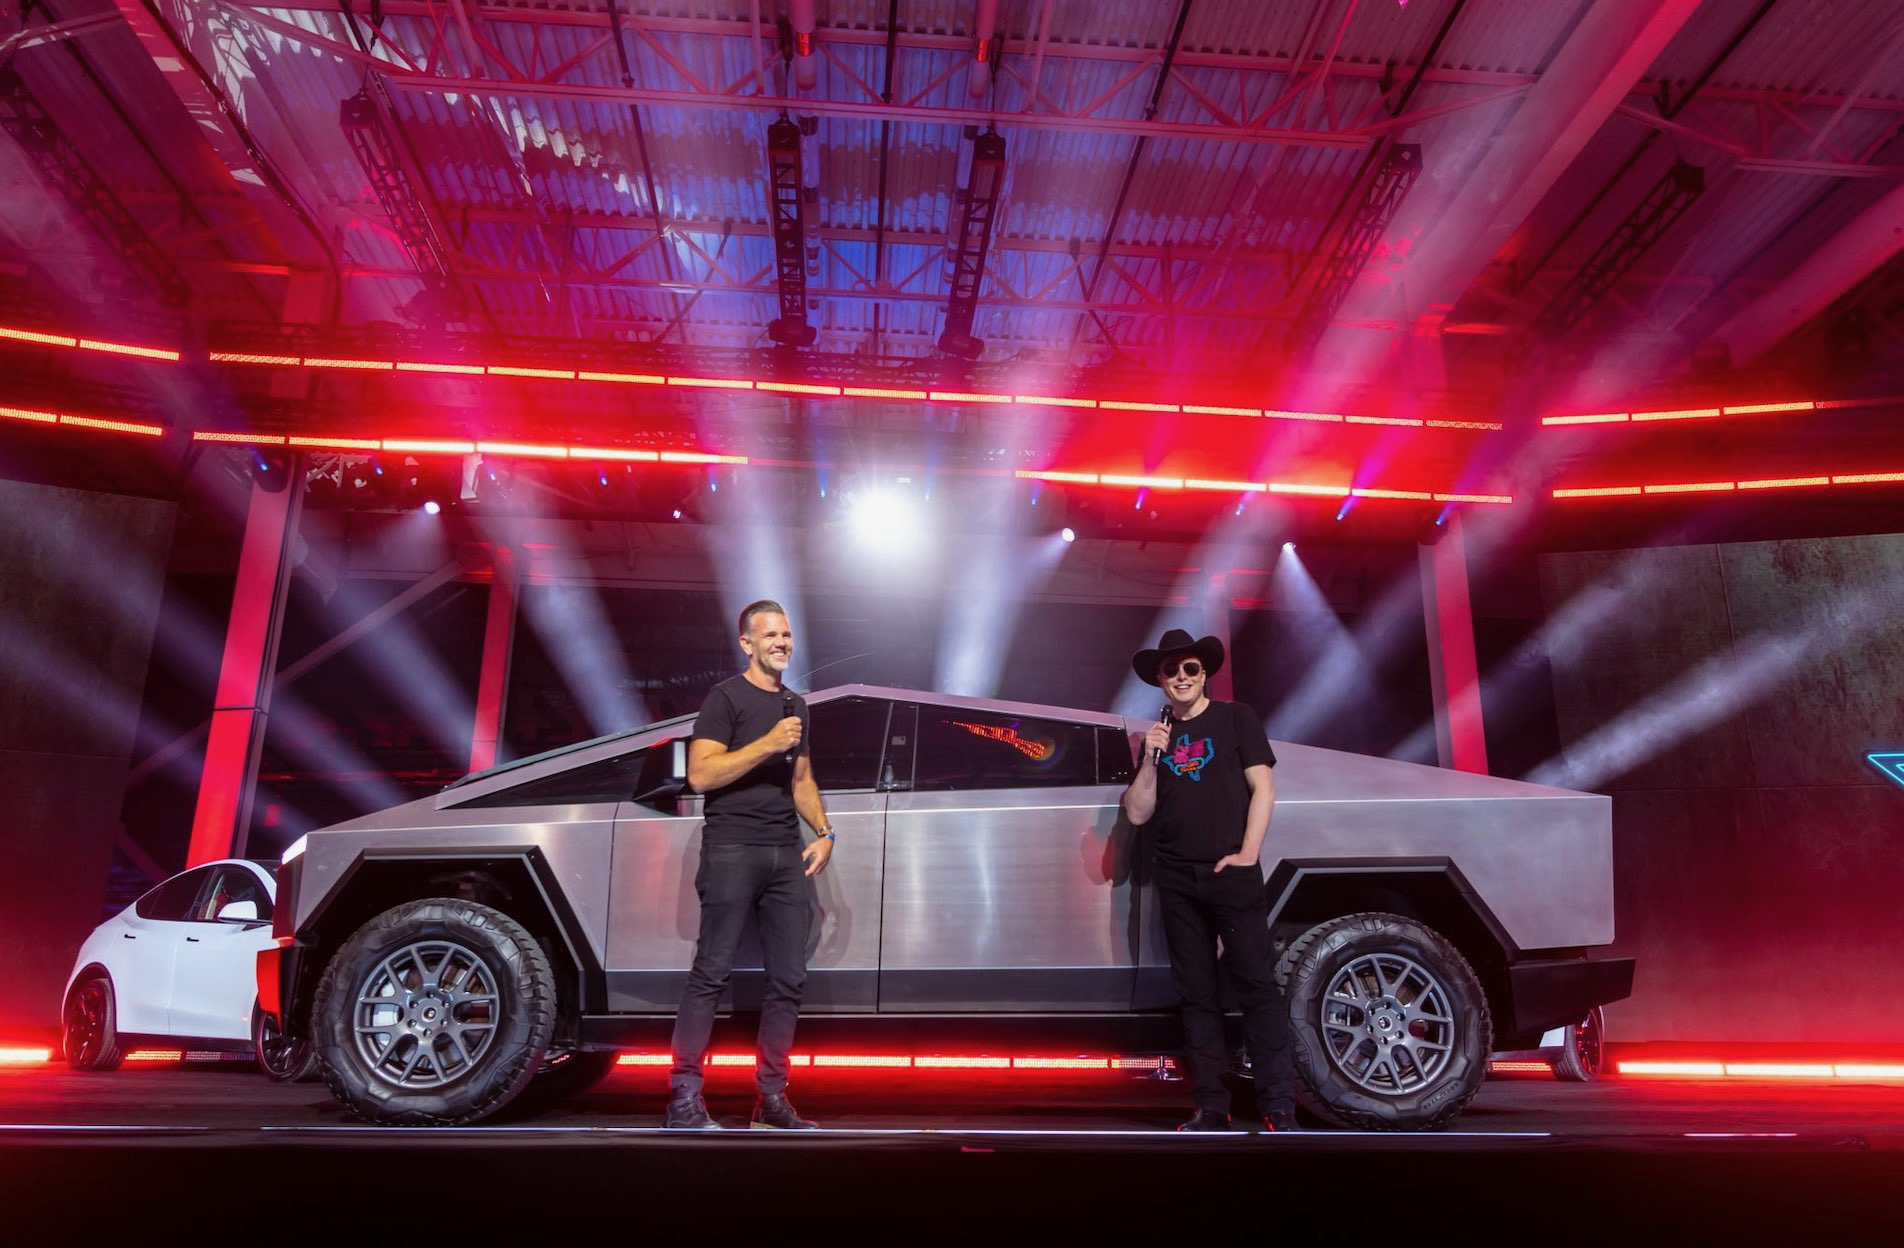 Musk confirms 2023 for Cybertruck deliveries as Tesla scales up production